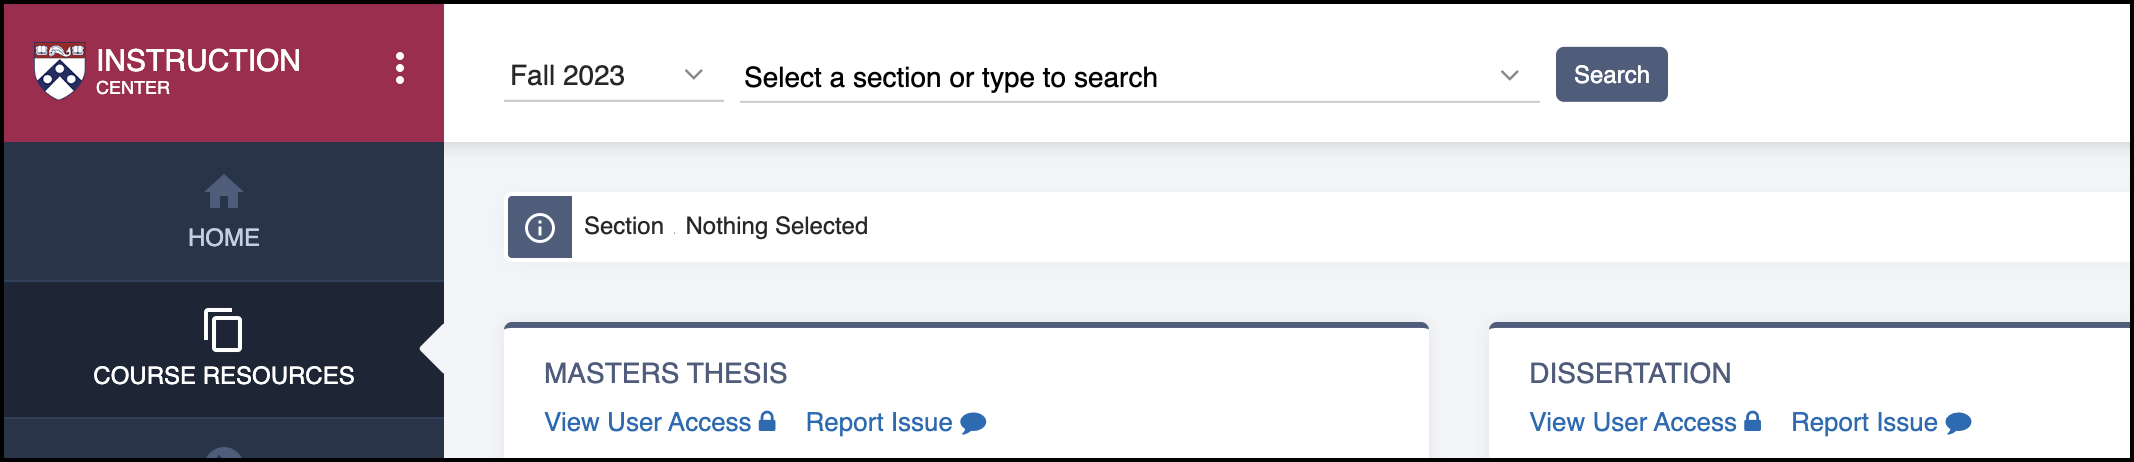 Instruction Center Section Search Bar